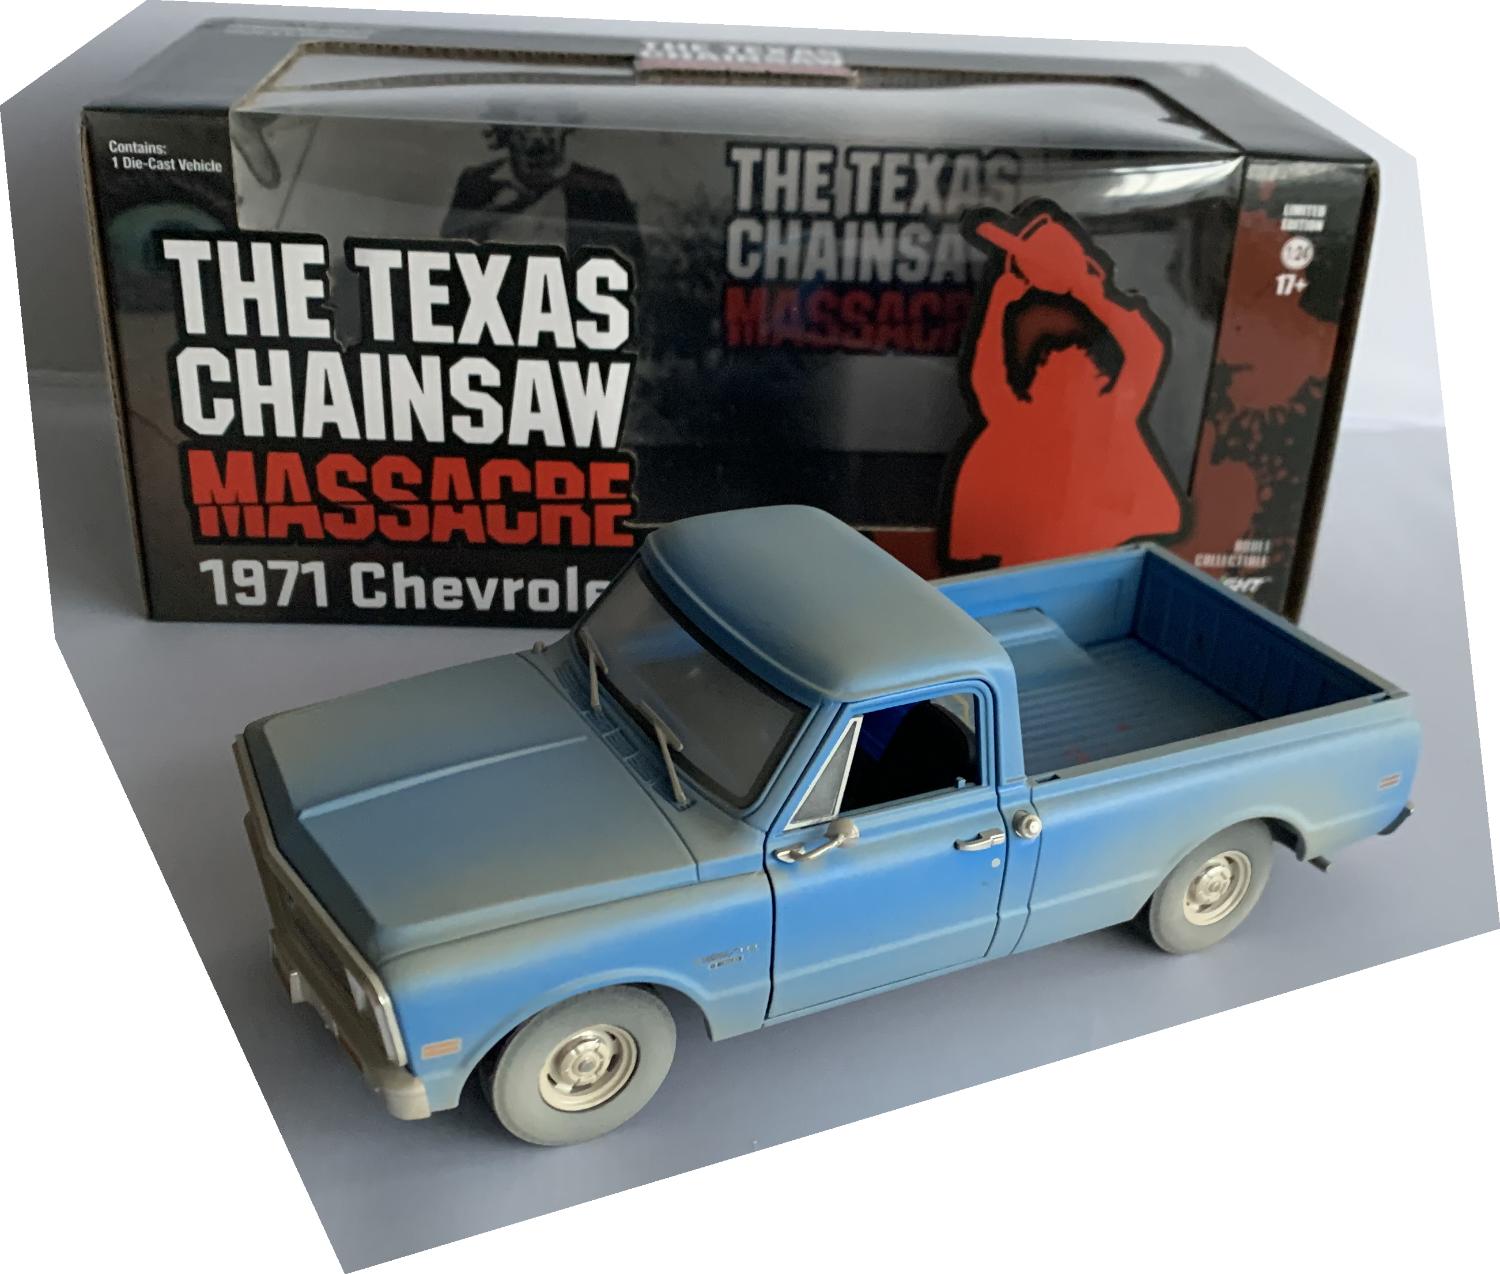 An excellent scale model of the Chevrolet C10 with high level of detail throughout, all authentically recreated.  Model is presented in The Texas Chainsaw Massacre themed boxed packaging. Limited Edition model with number on base of the car.  The car is approx. 21 cm long and the presentation box is 30 cm long